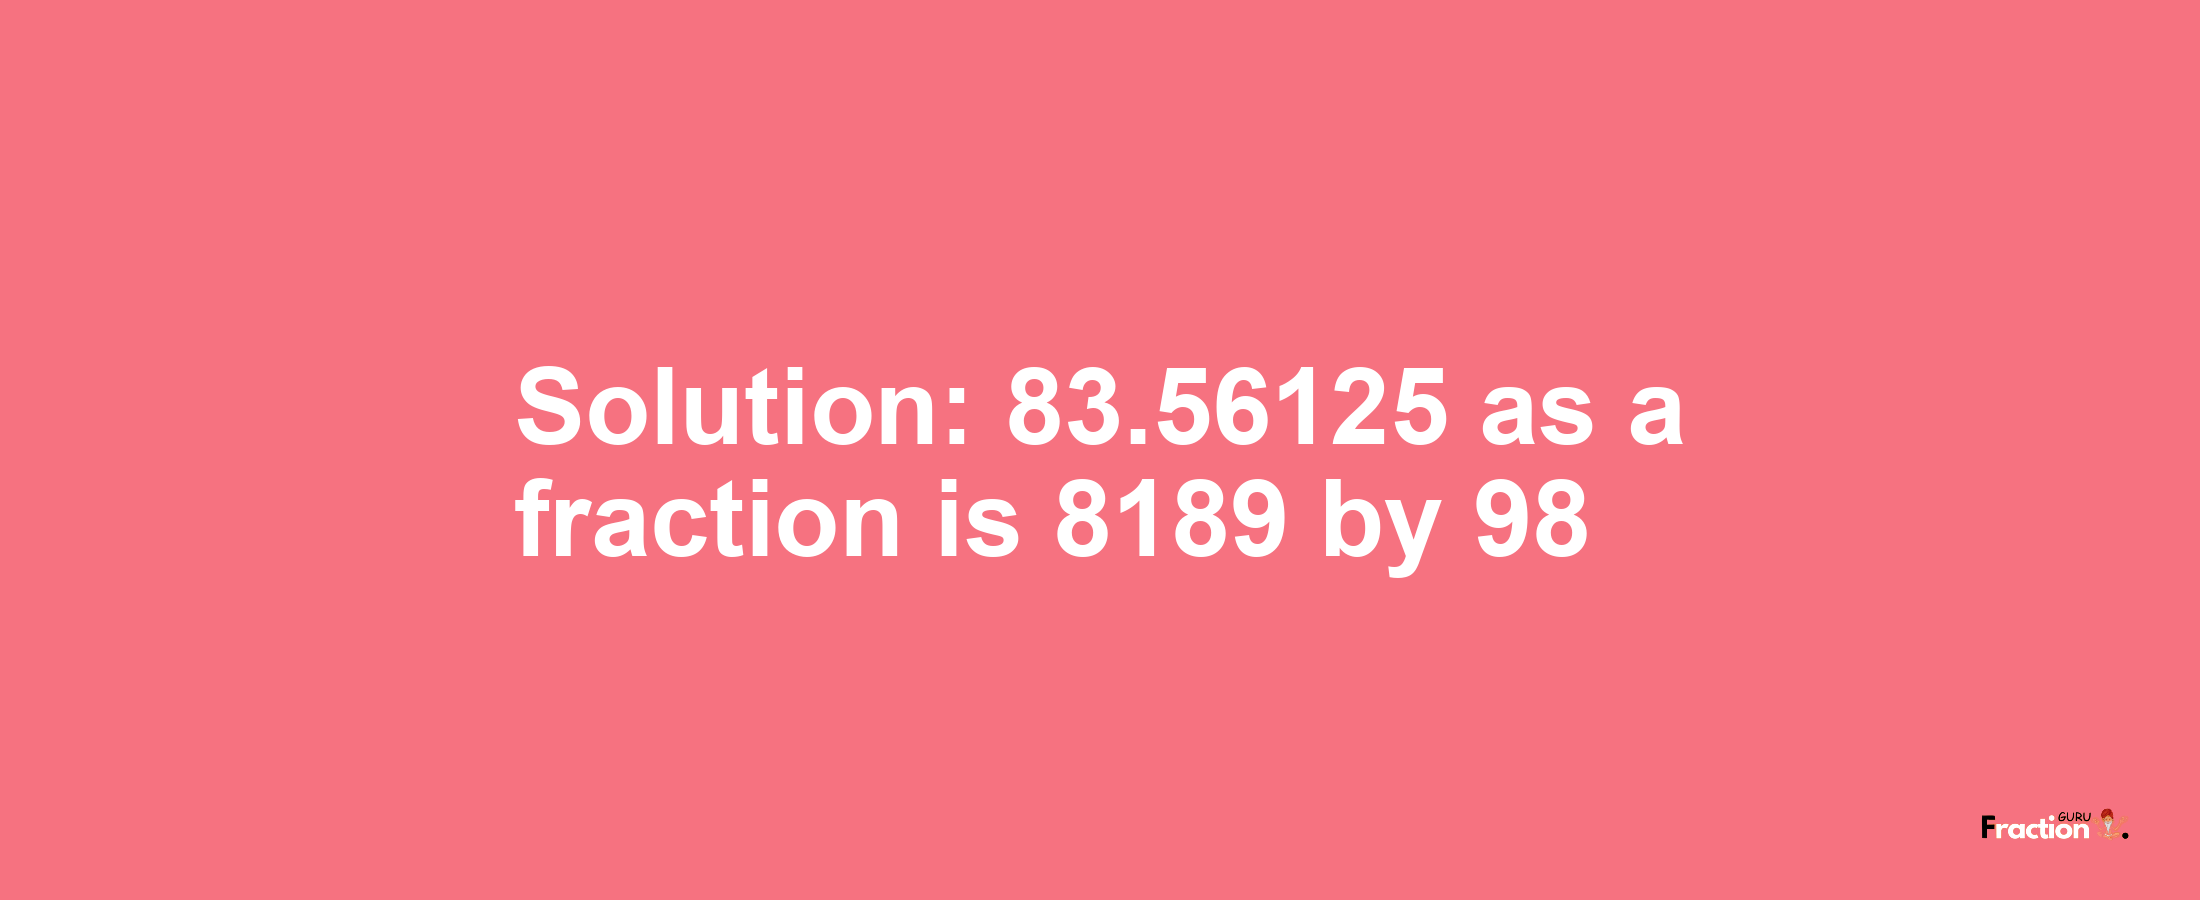 Solution:83.56125 as a fraction is 8189/98